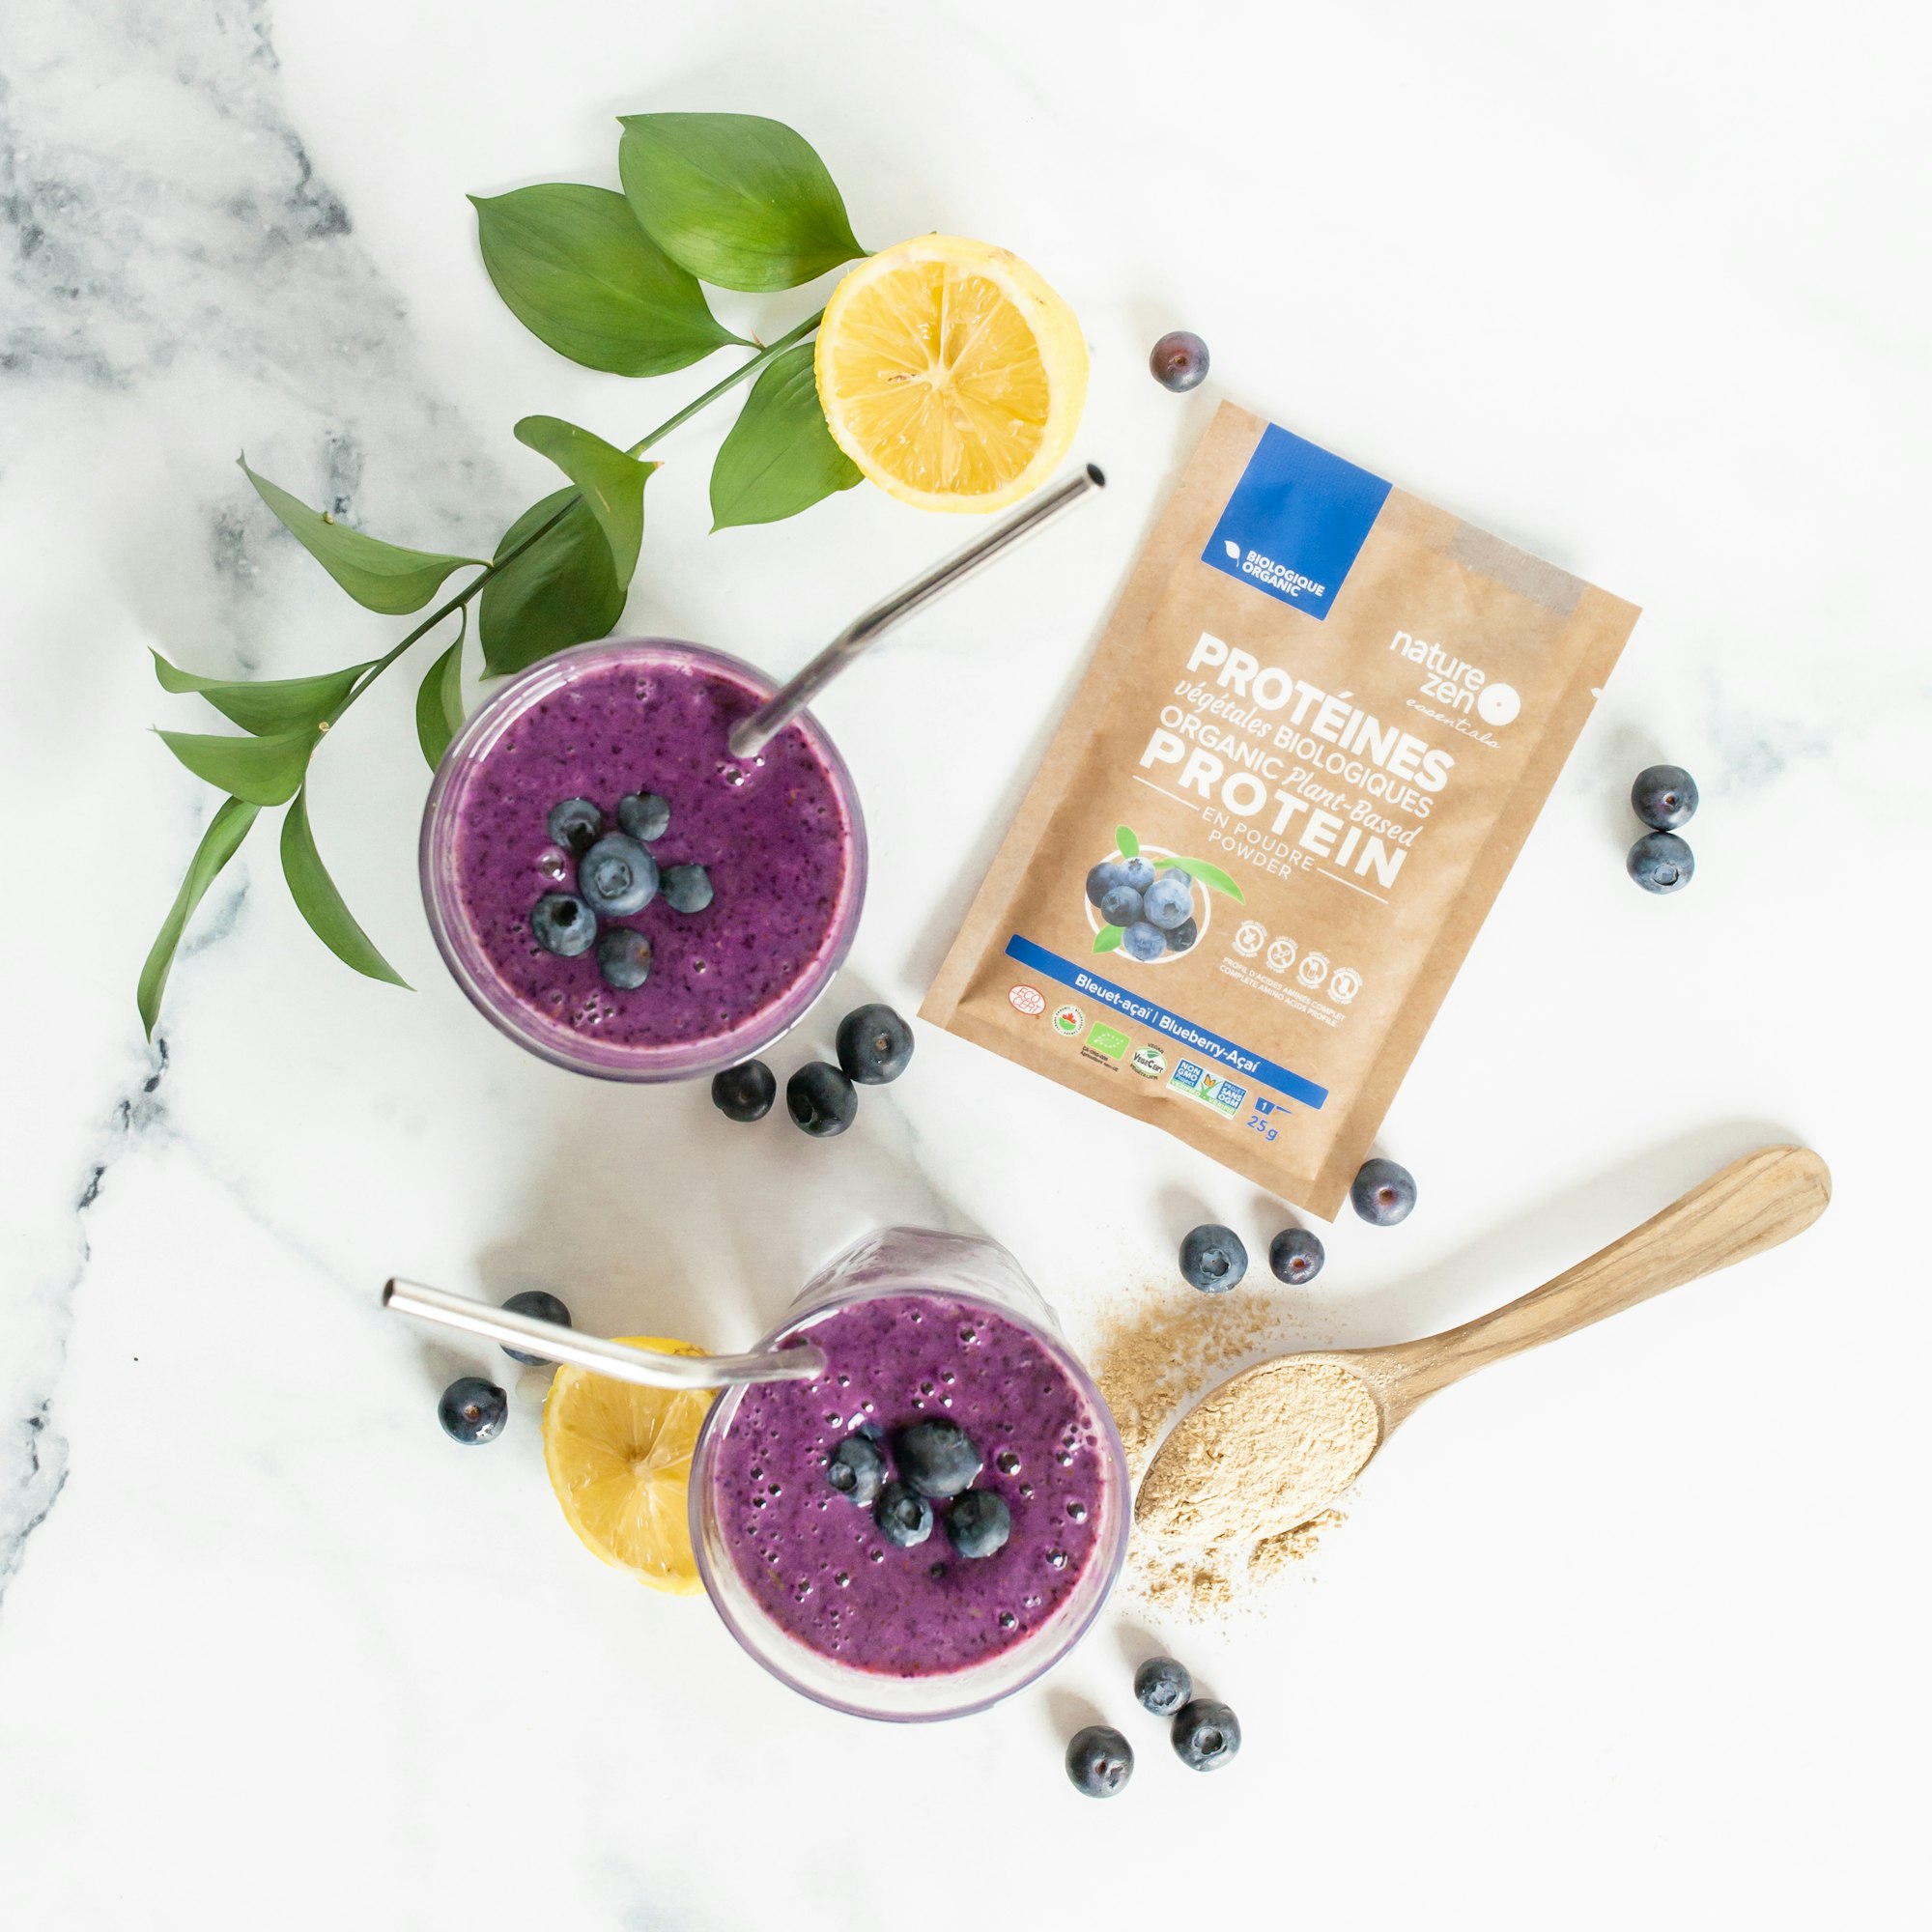 Energizing organic and vegan blueberry smoothie to start the day with a healthy energy ⚡️☀️